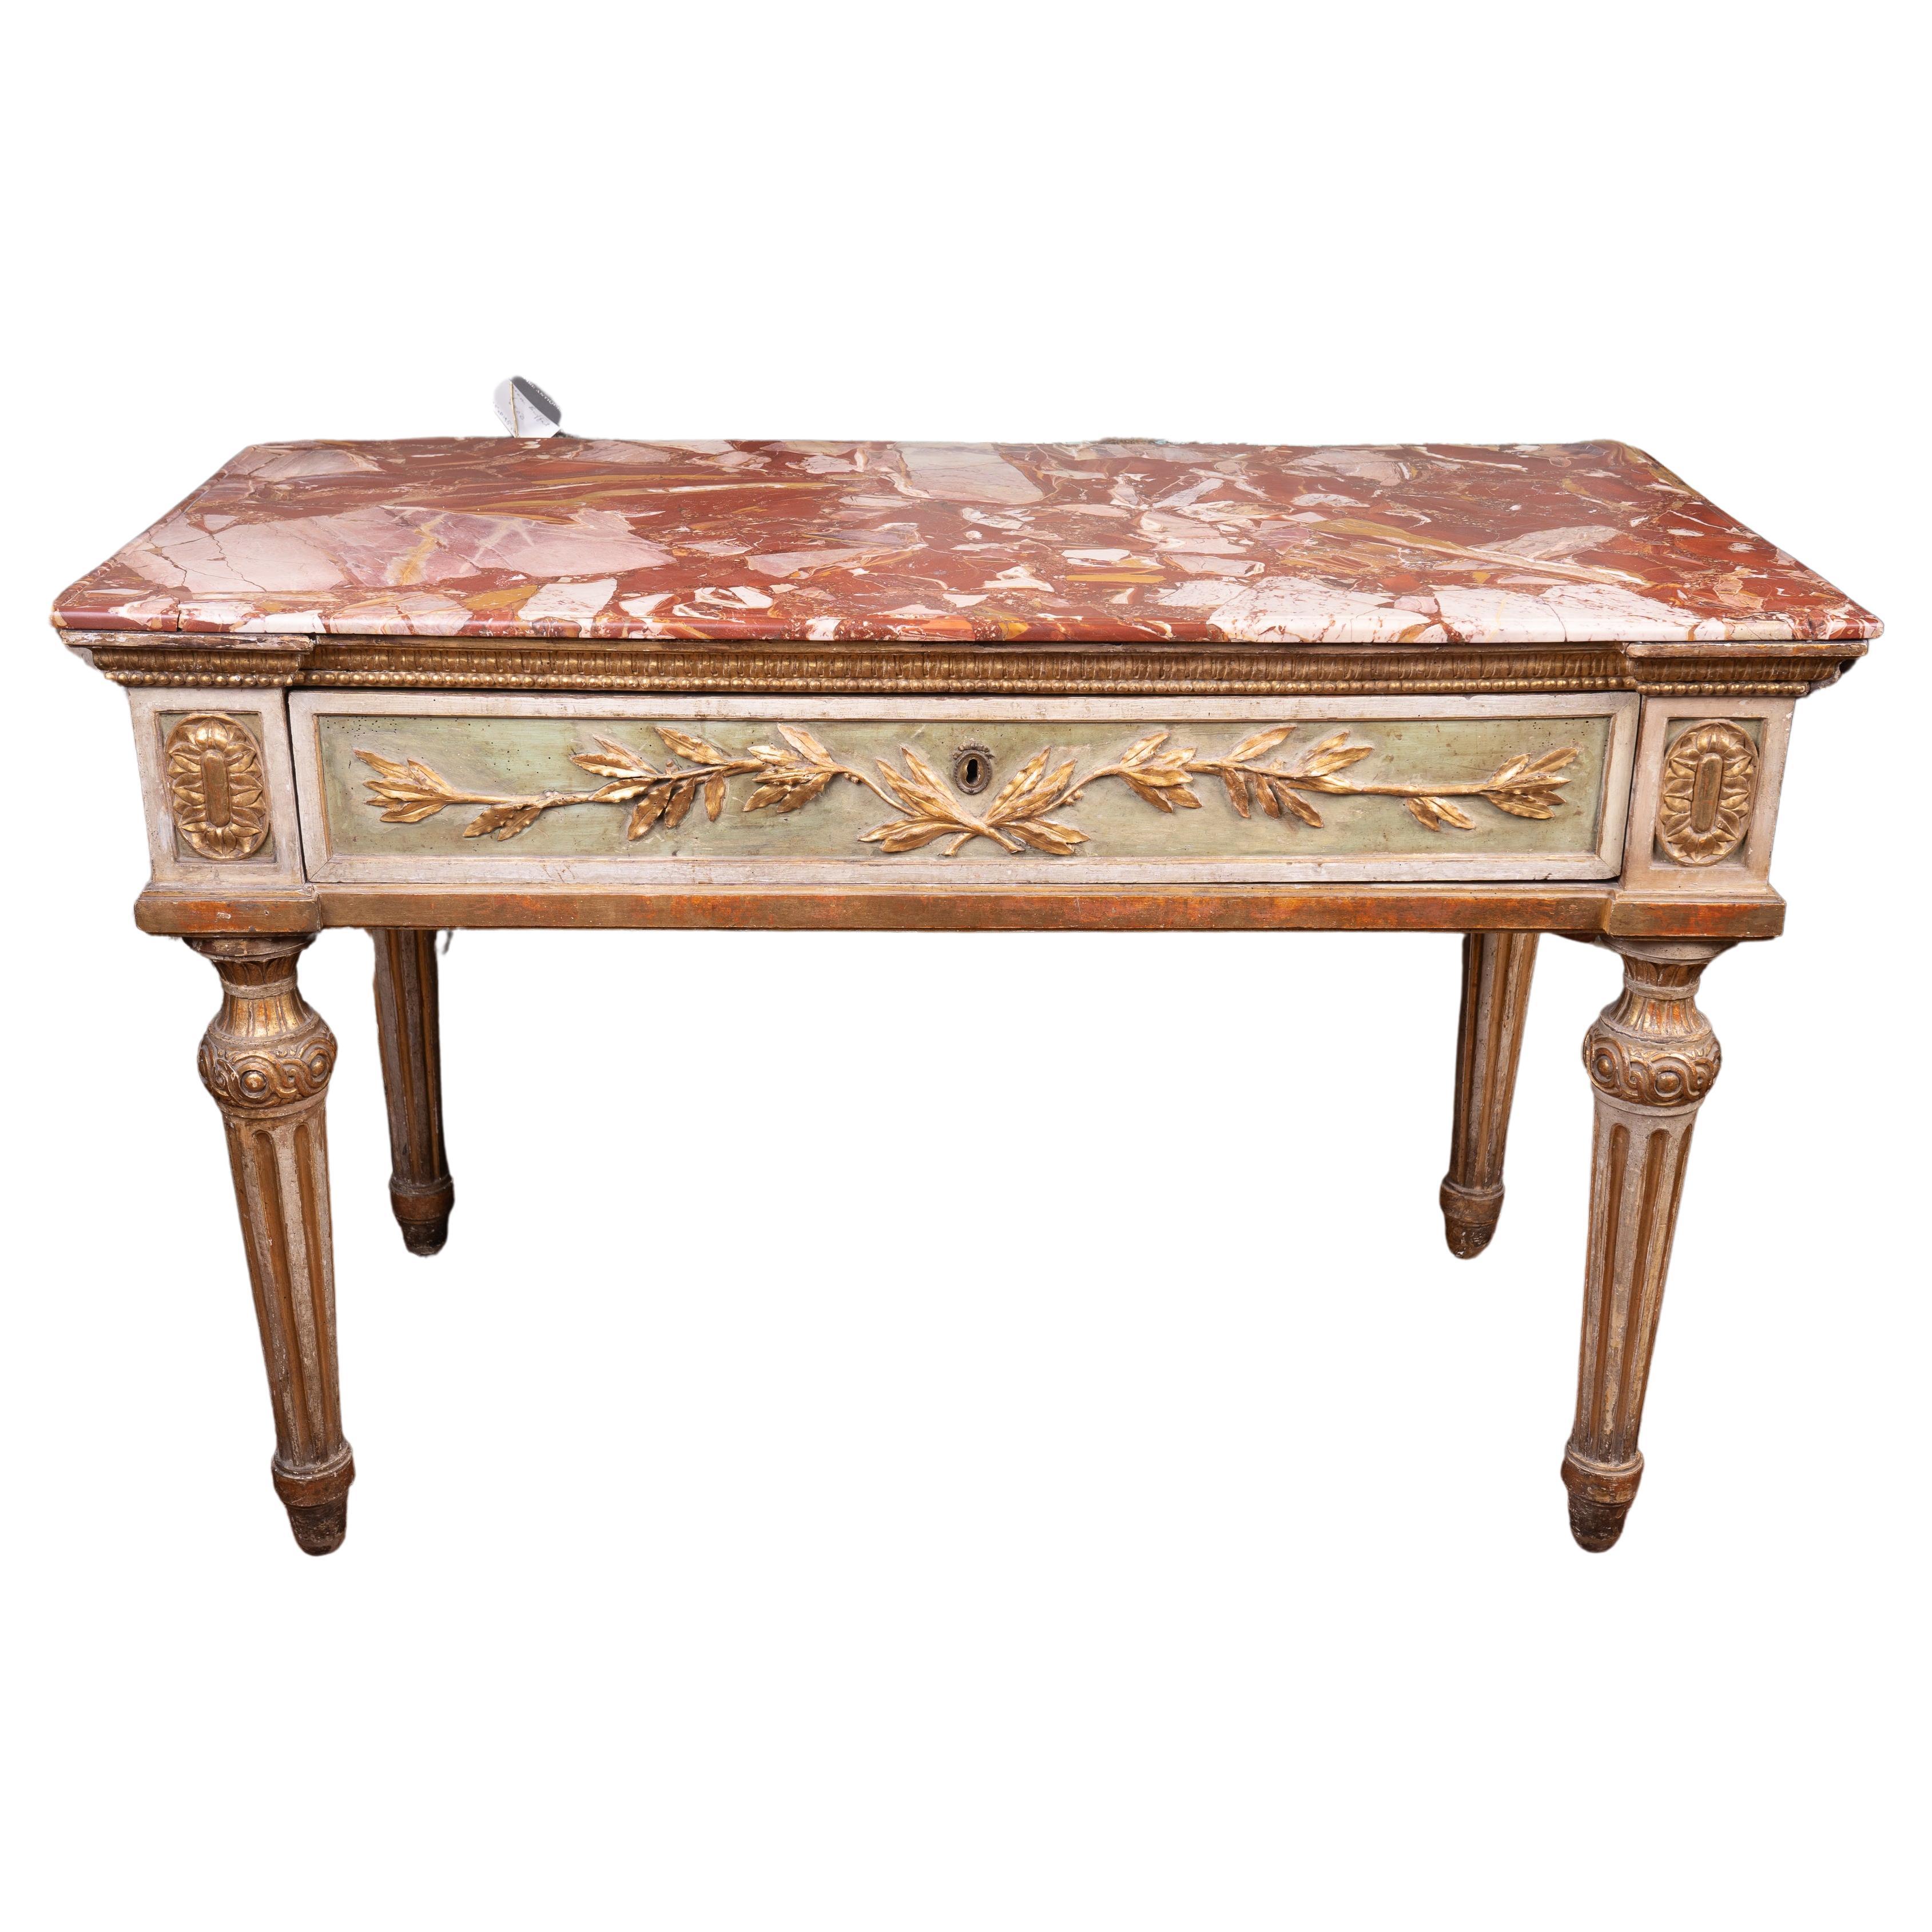 Exceptional 18thc Painted and Gilded Roman Console For Sale